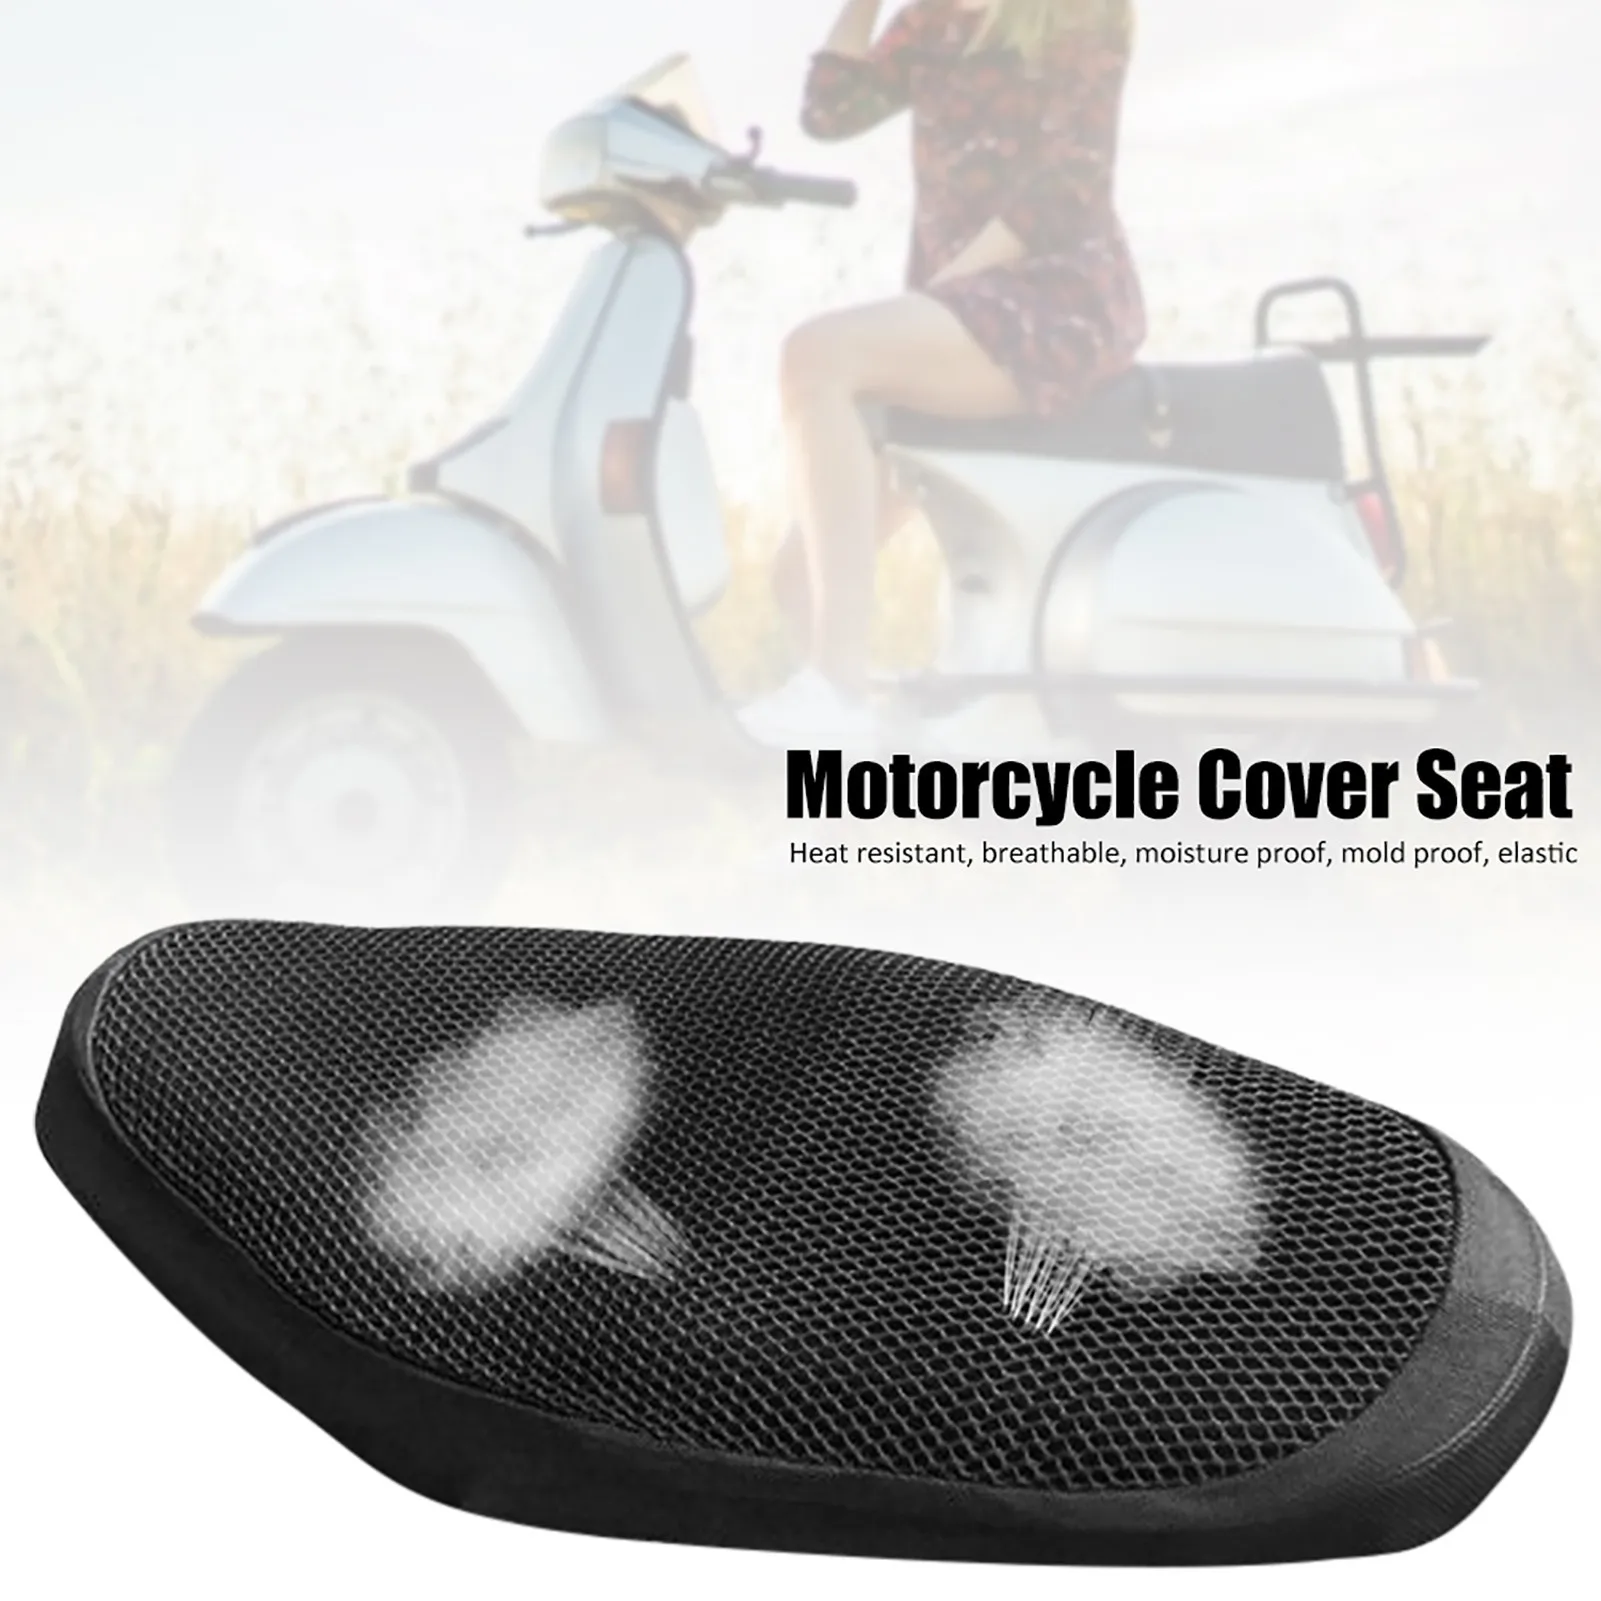 

Scooter Seat Cover Motorcycle Scooter Moped Seat Cover Saddle Seat Protector Cover Breathable Net CushionBlack Protection Seat